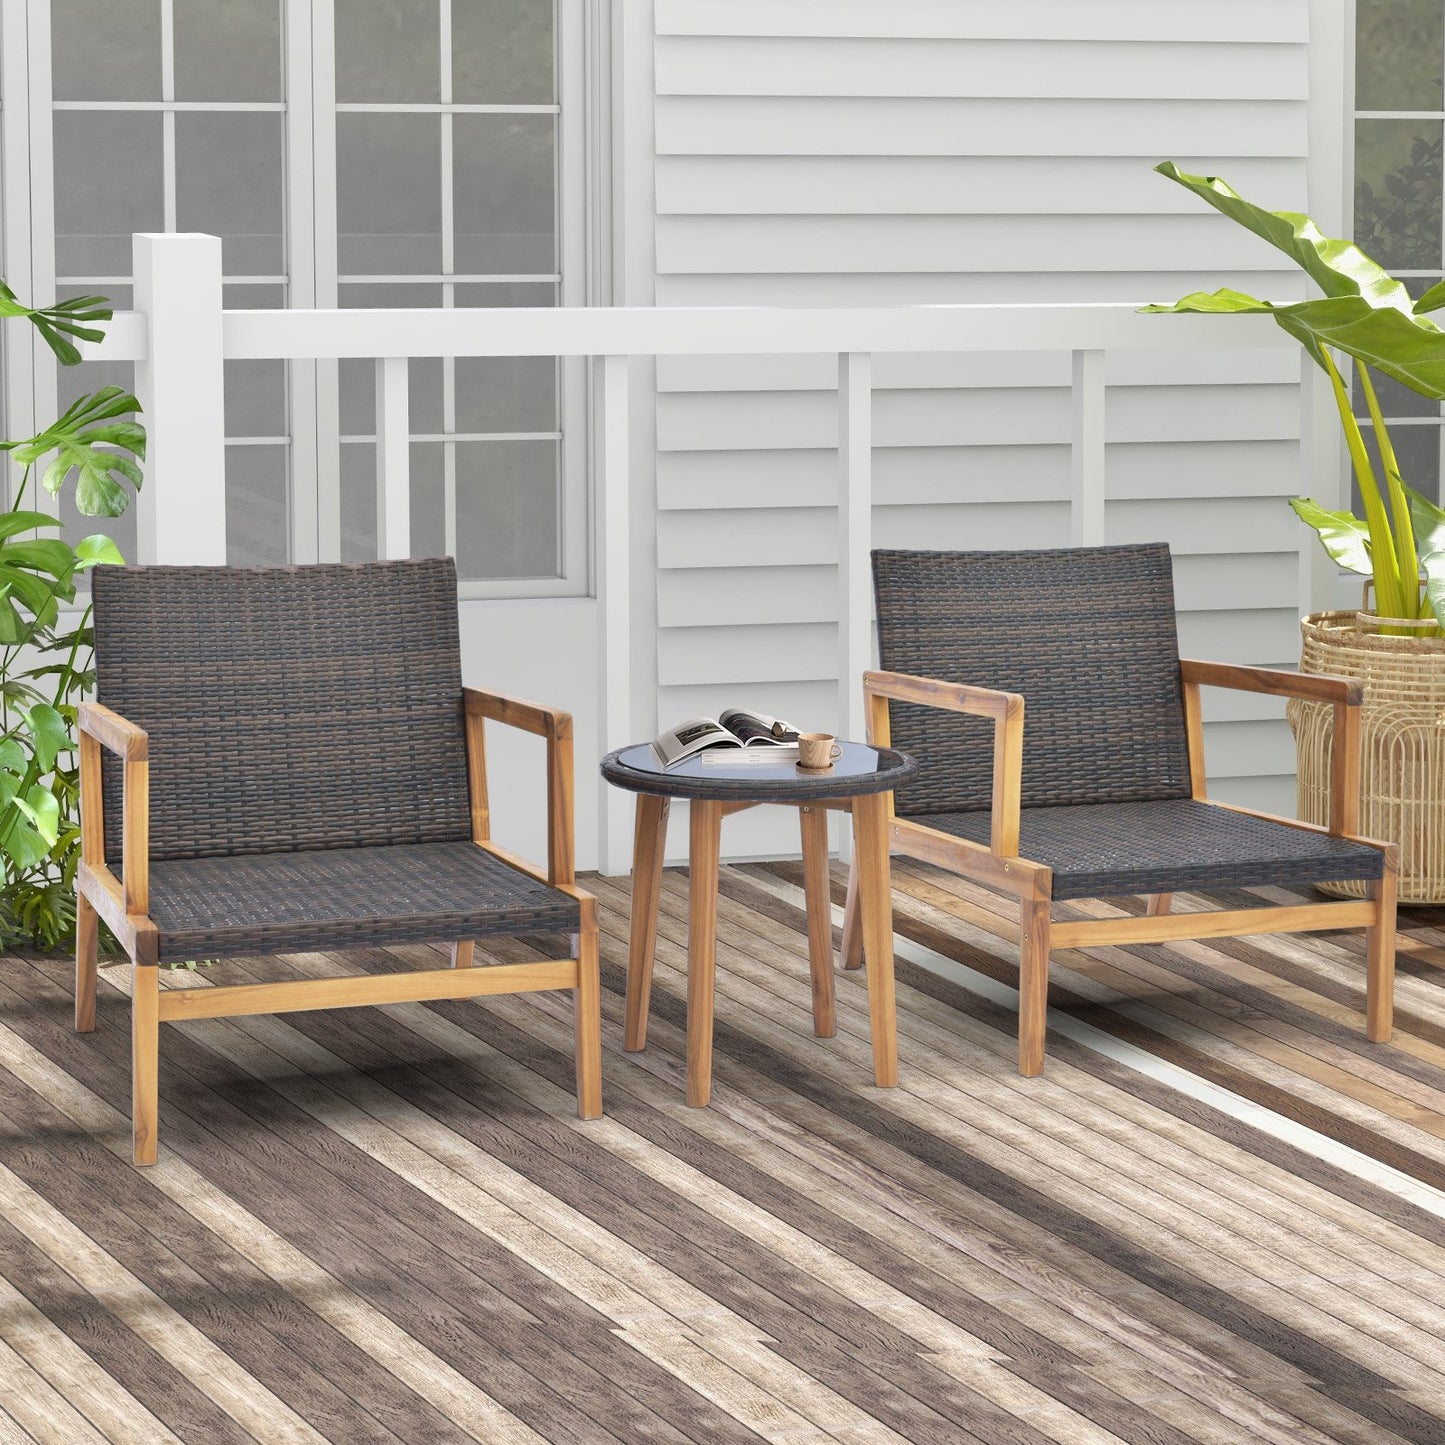 3 Pieces Patio Furniture Set with Cushioned Chairs and Tempered Glass Side Table, Brown